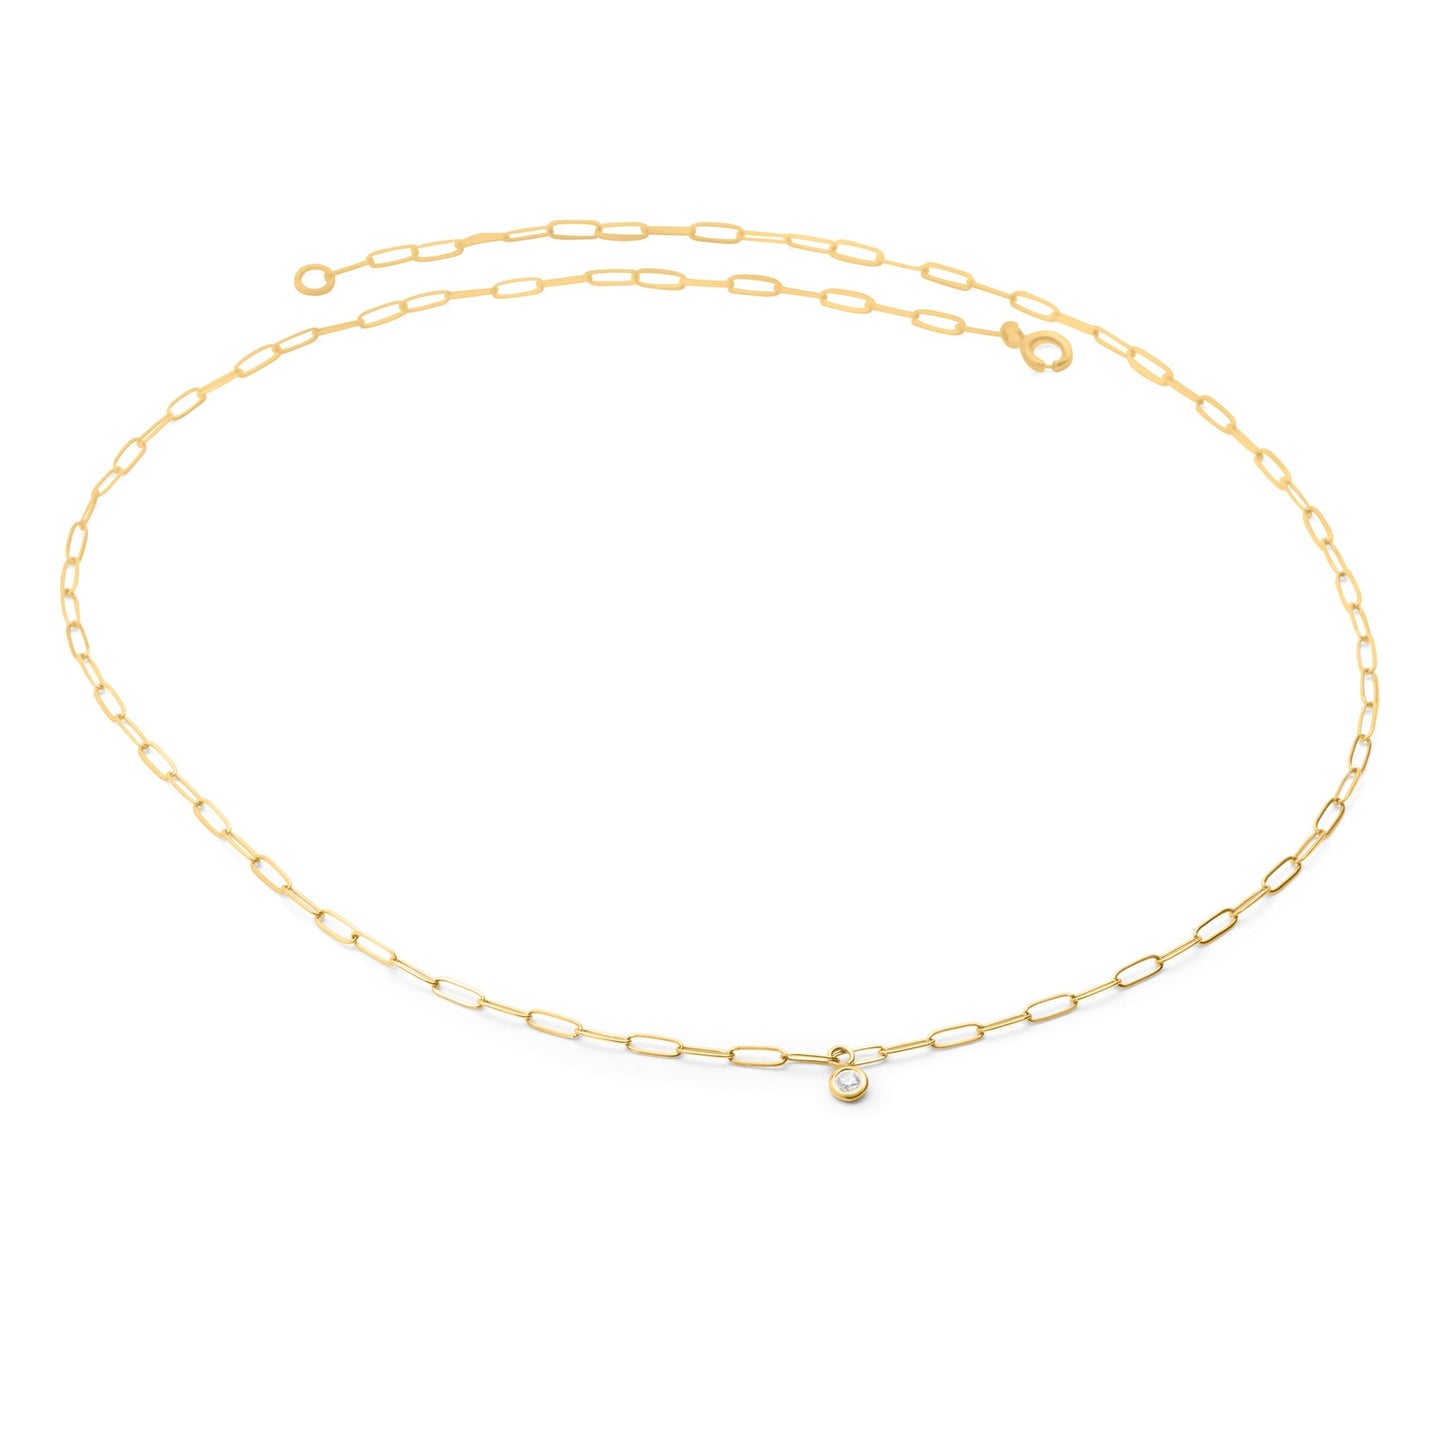 Gold Paperclip Chain Link Necklace with Diamond Pendant